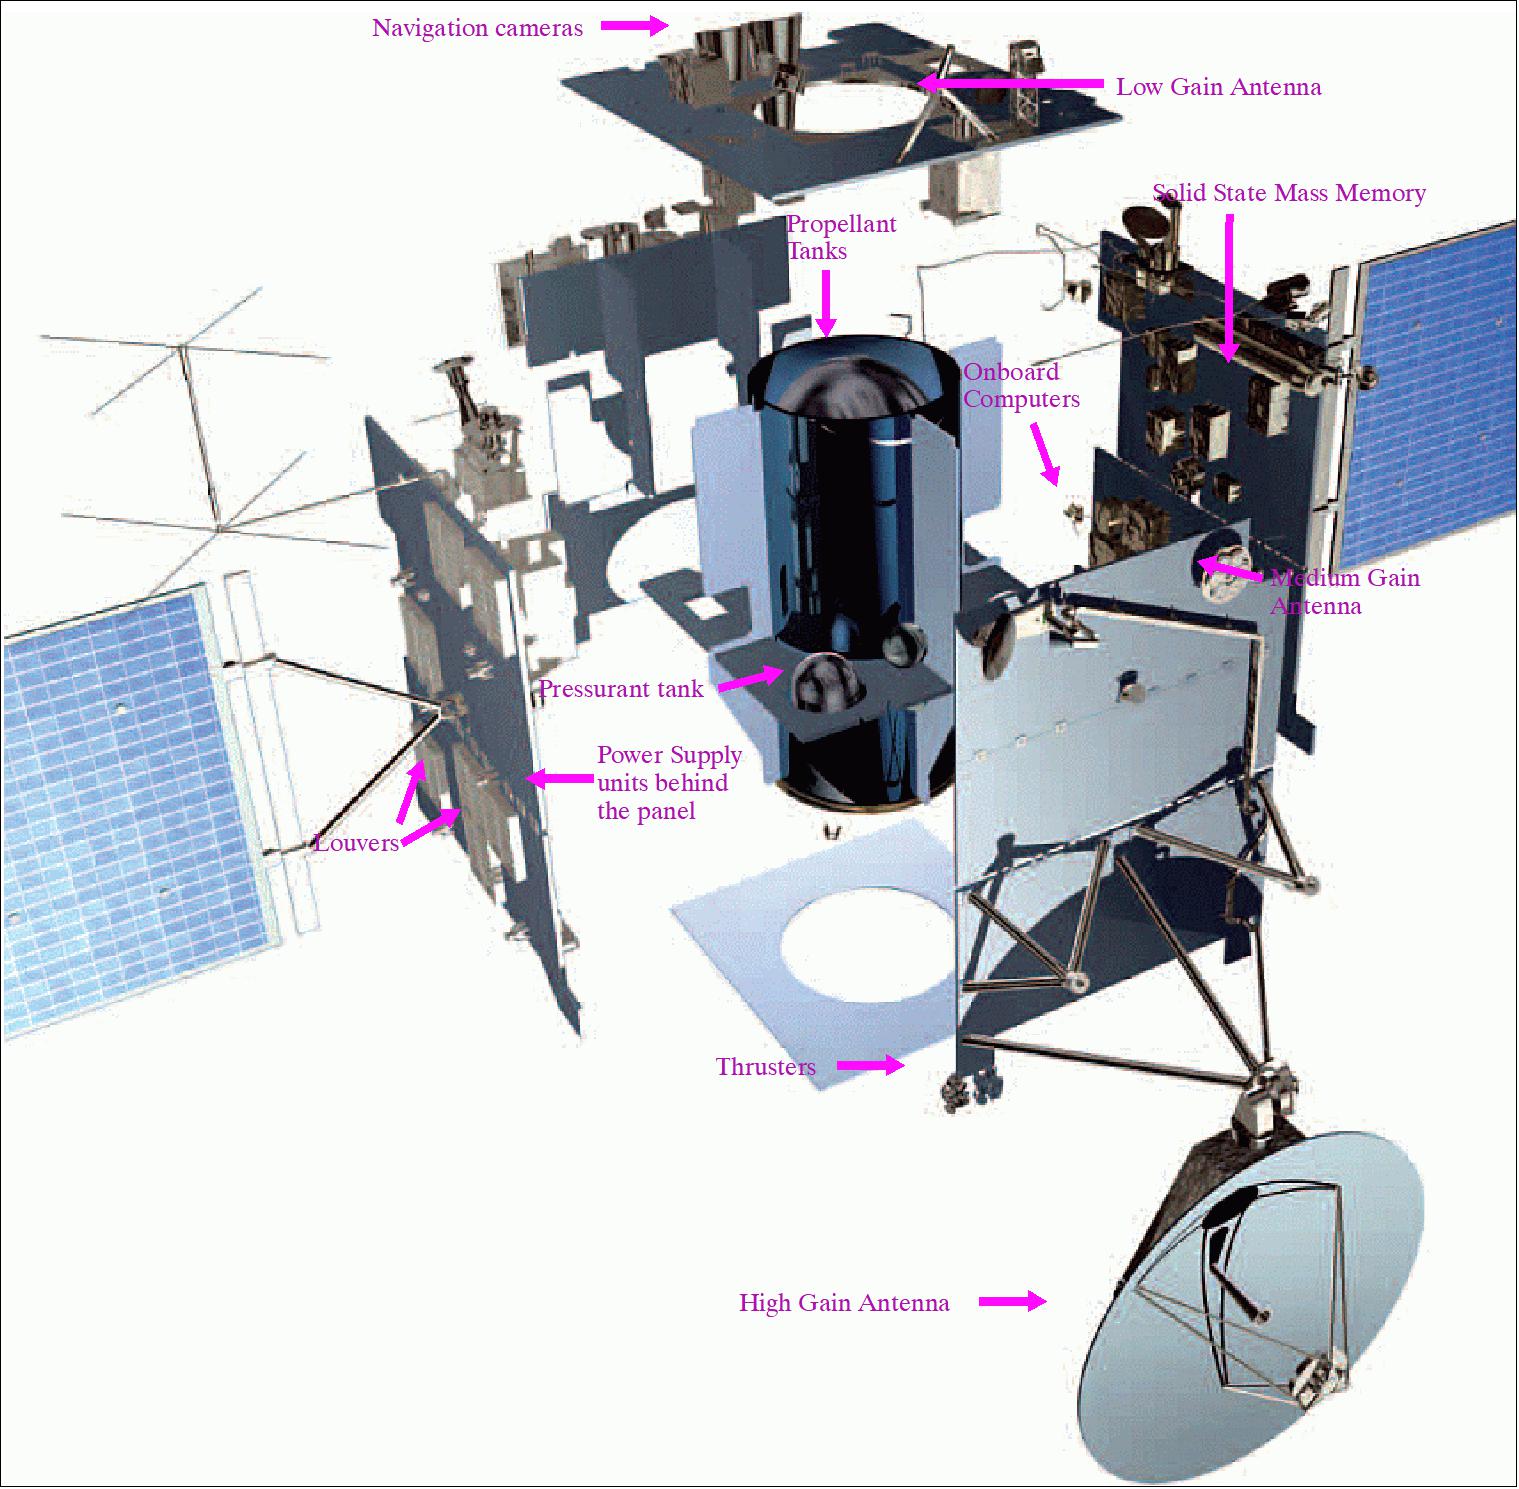 Figure 5: Exploded view of major spacecraft components (image credit: ESA, AOES Medialab)